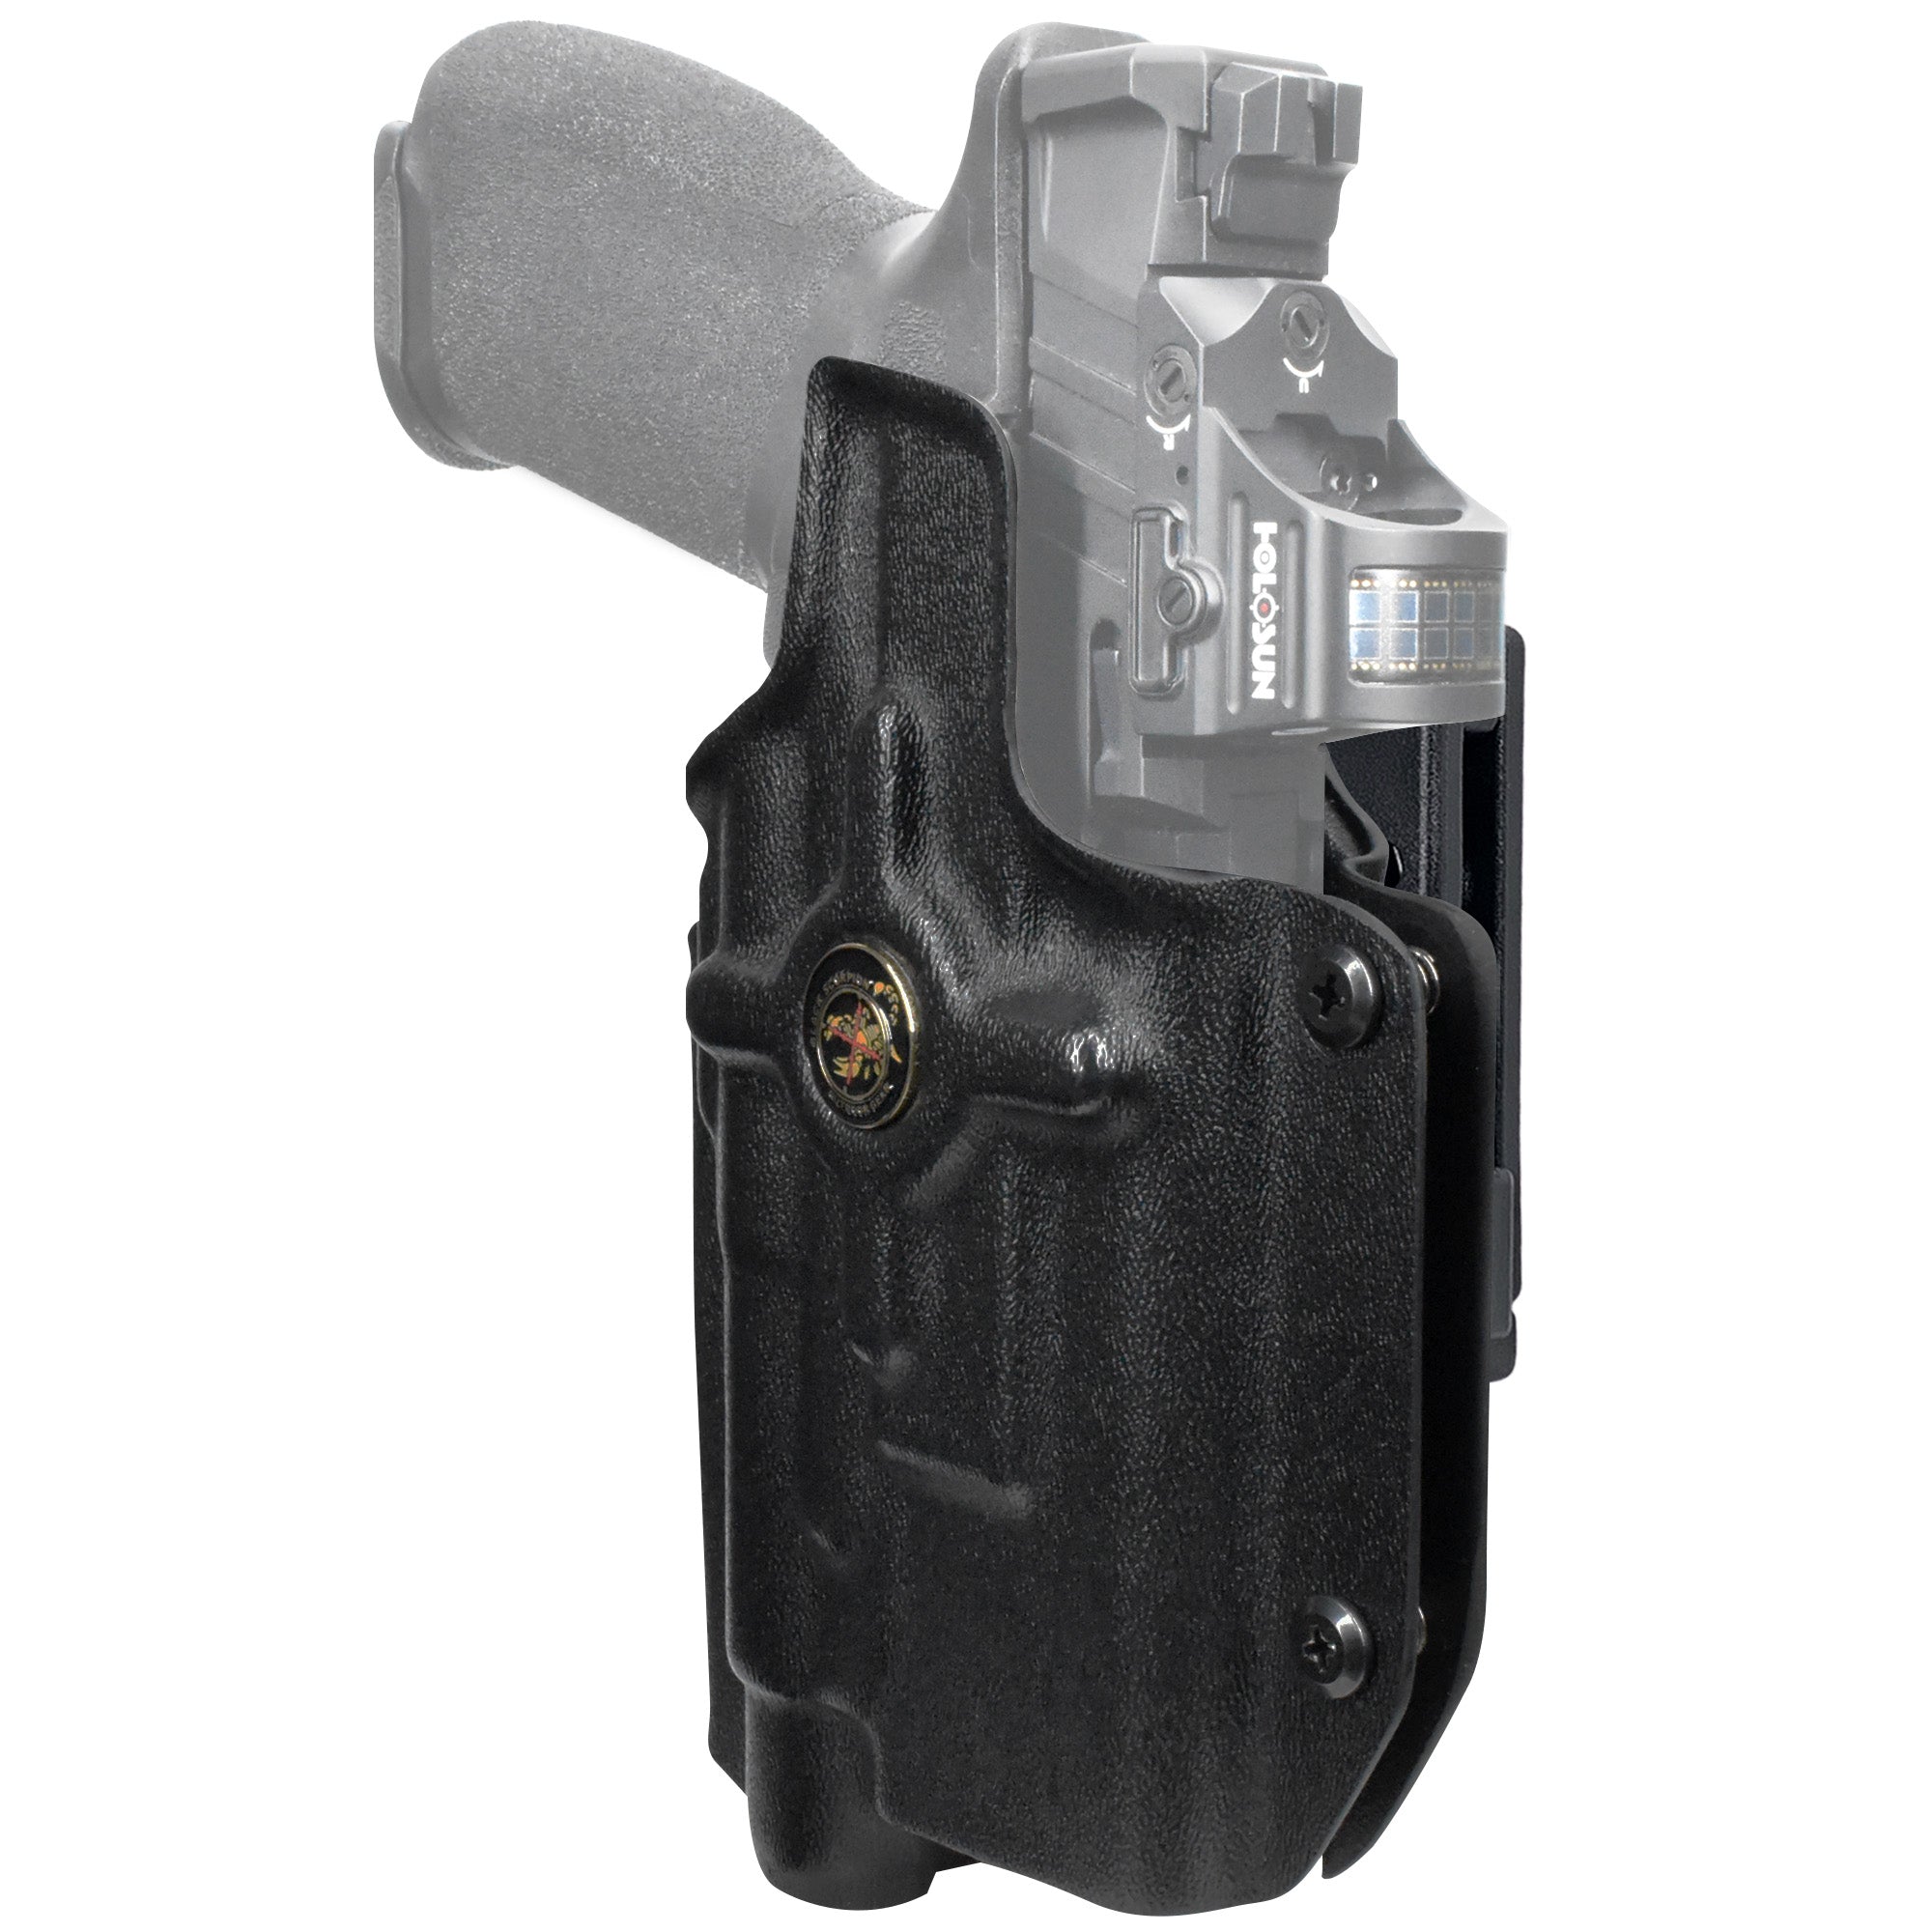 Glock 17, 22, 44, 45 w/ Streamlight TLR-1 HL Pro IDPA Competition Holster